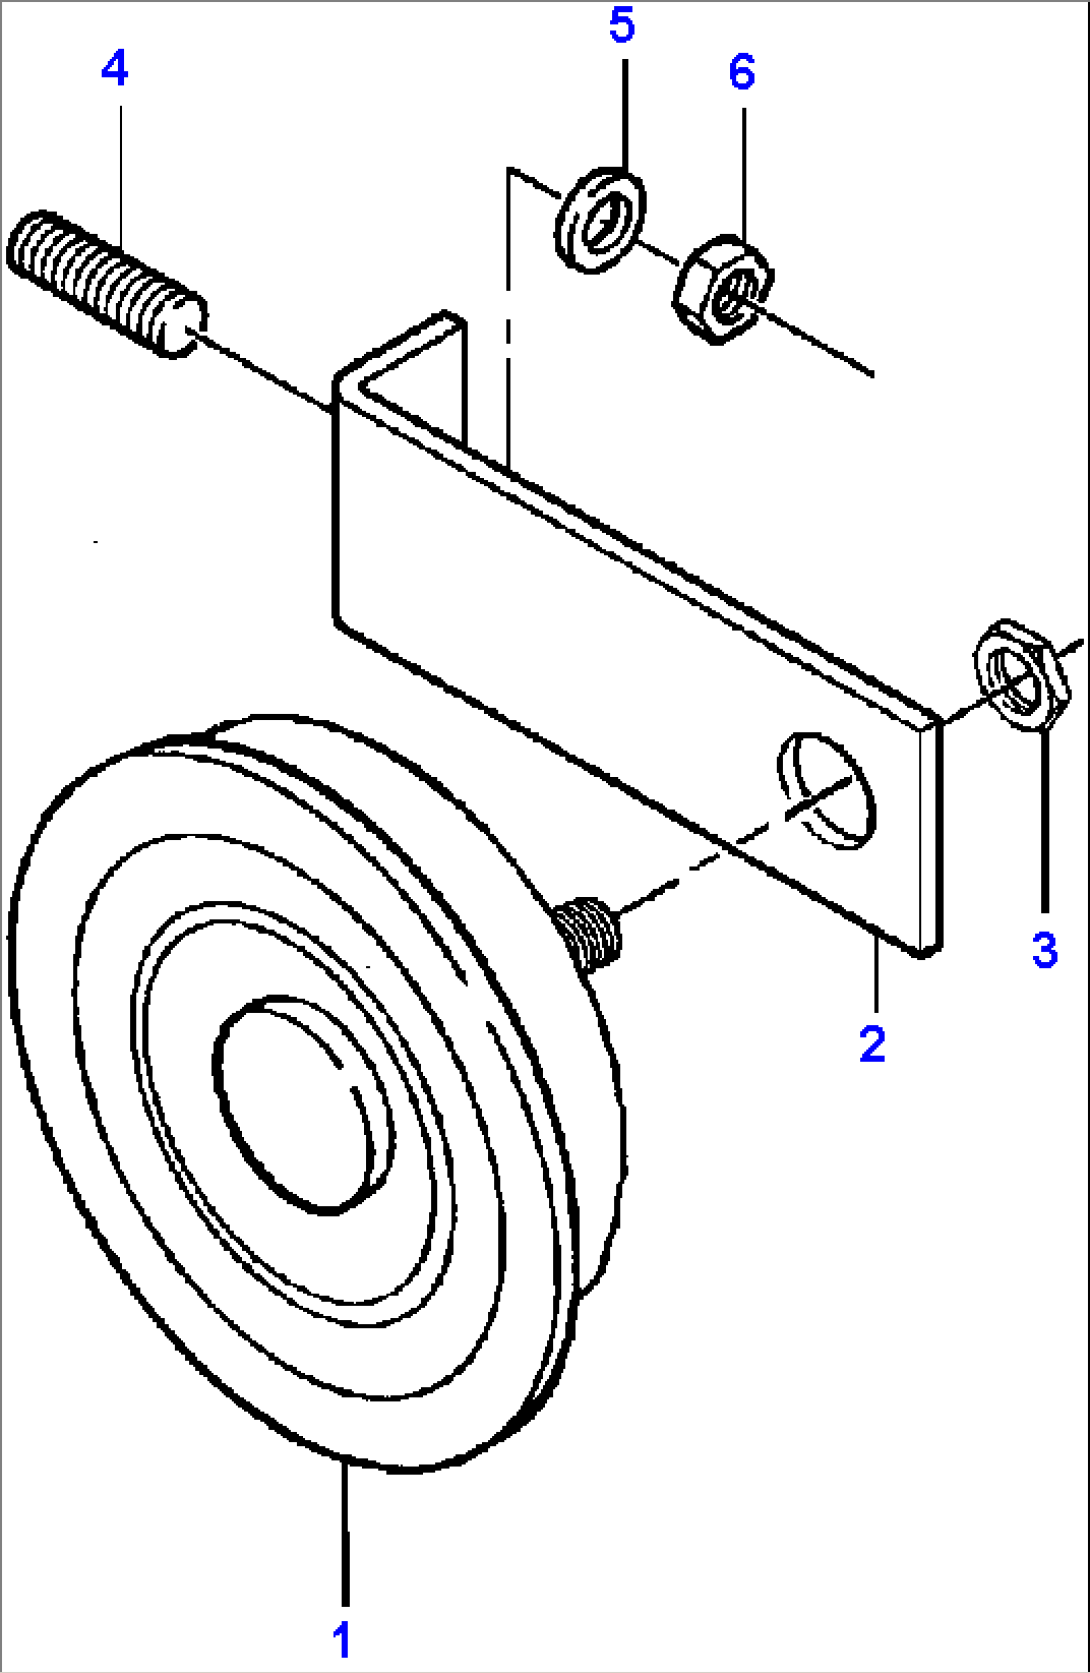 FIG. E5180-01A0 HORN - S/N 203112 AND UP